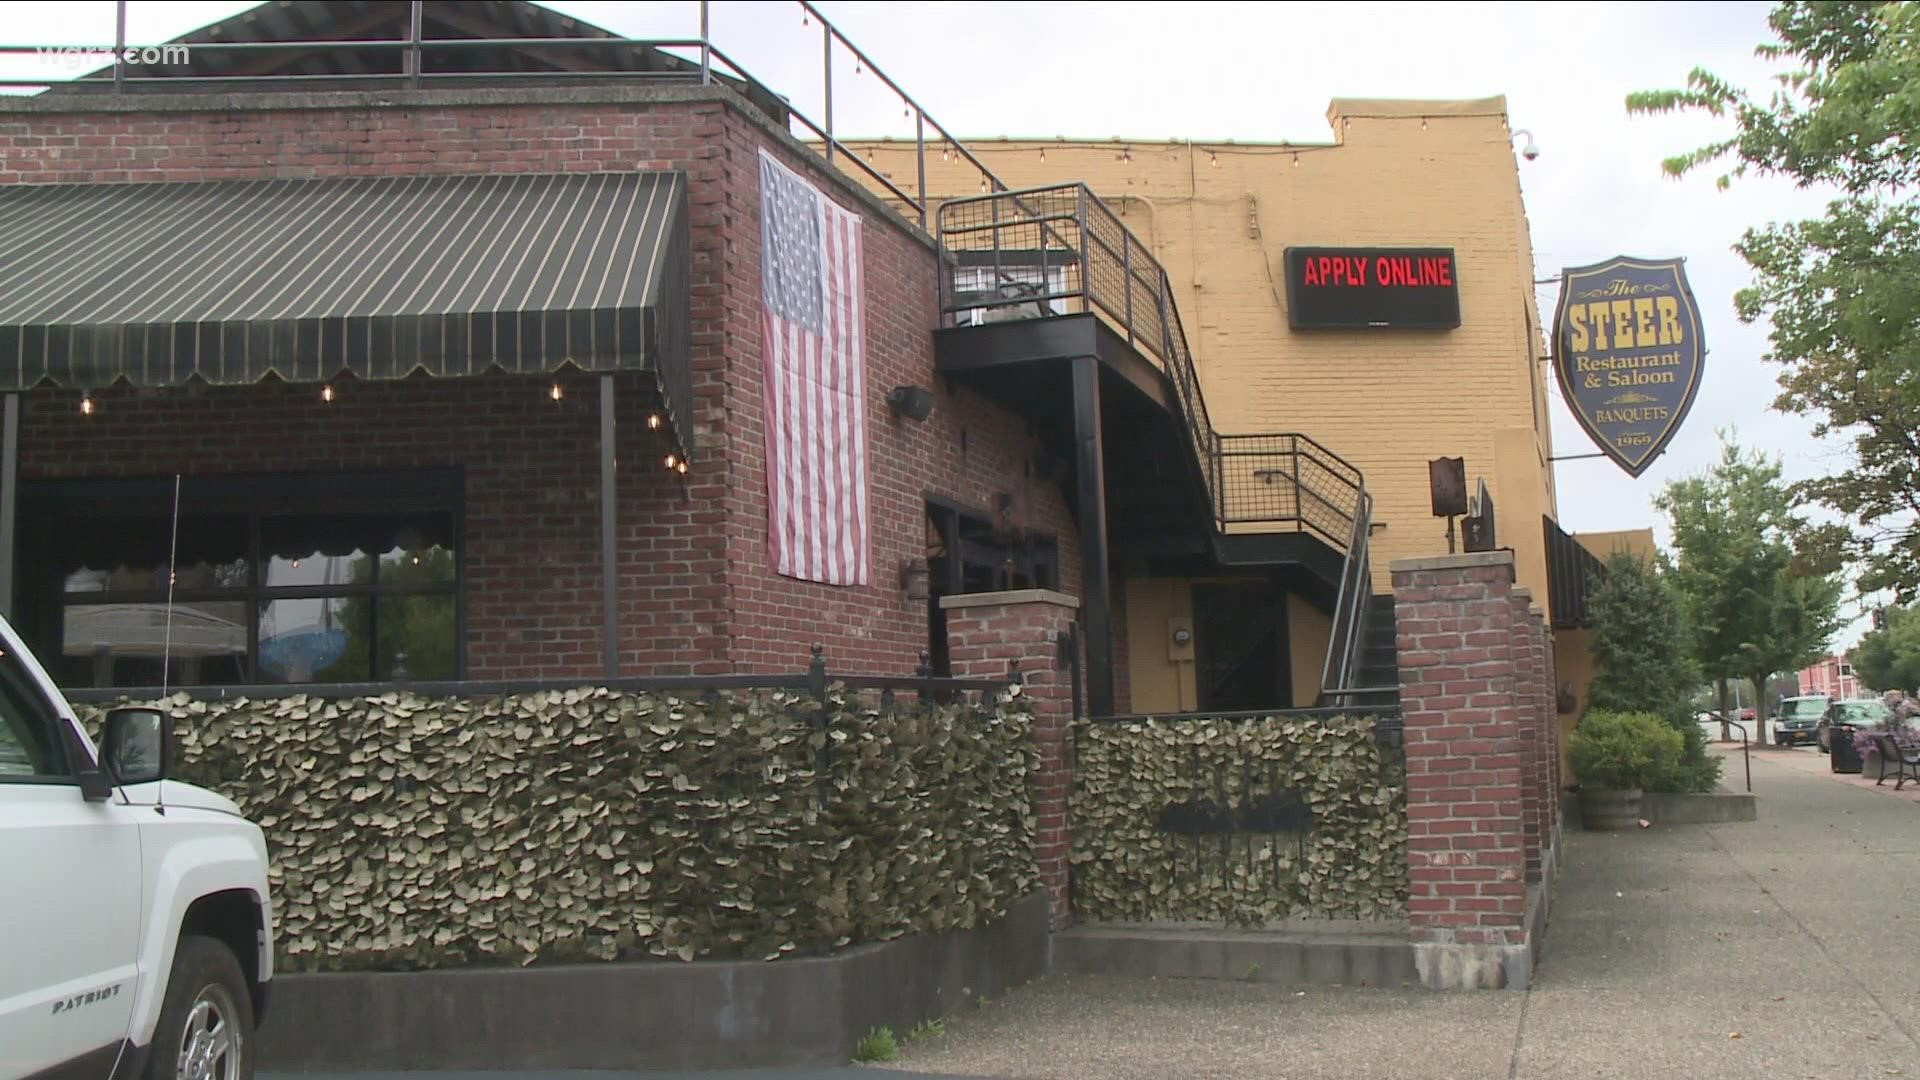 May not be the end for Steer, Lake Effect restaurants